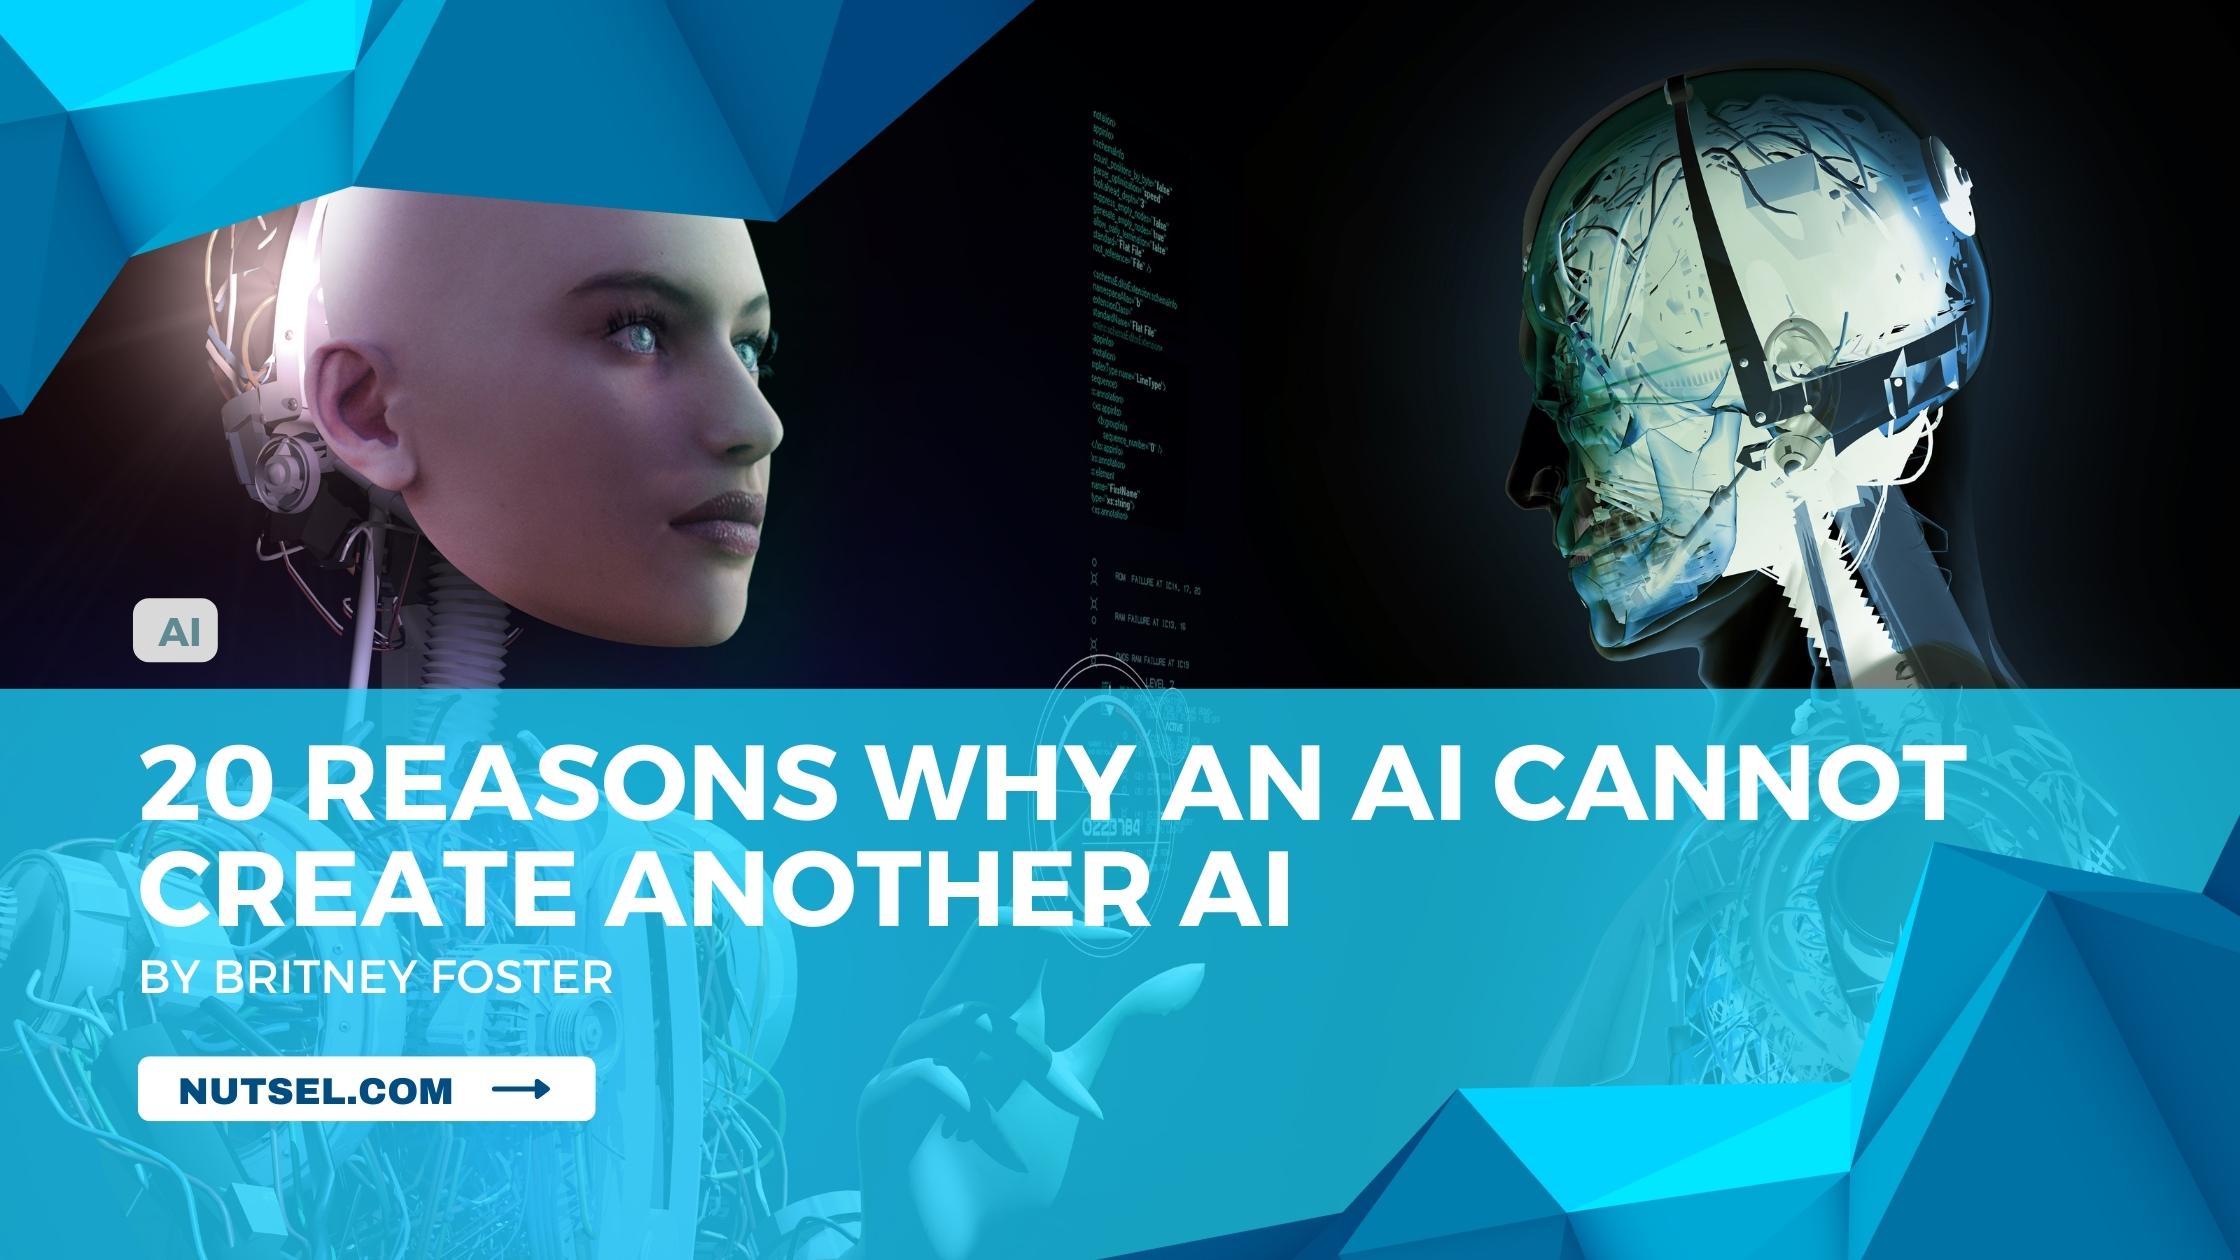 20 reasons why an AI cannot create another AI